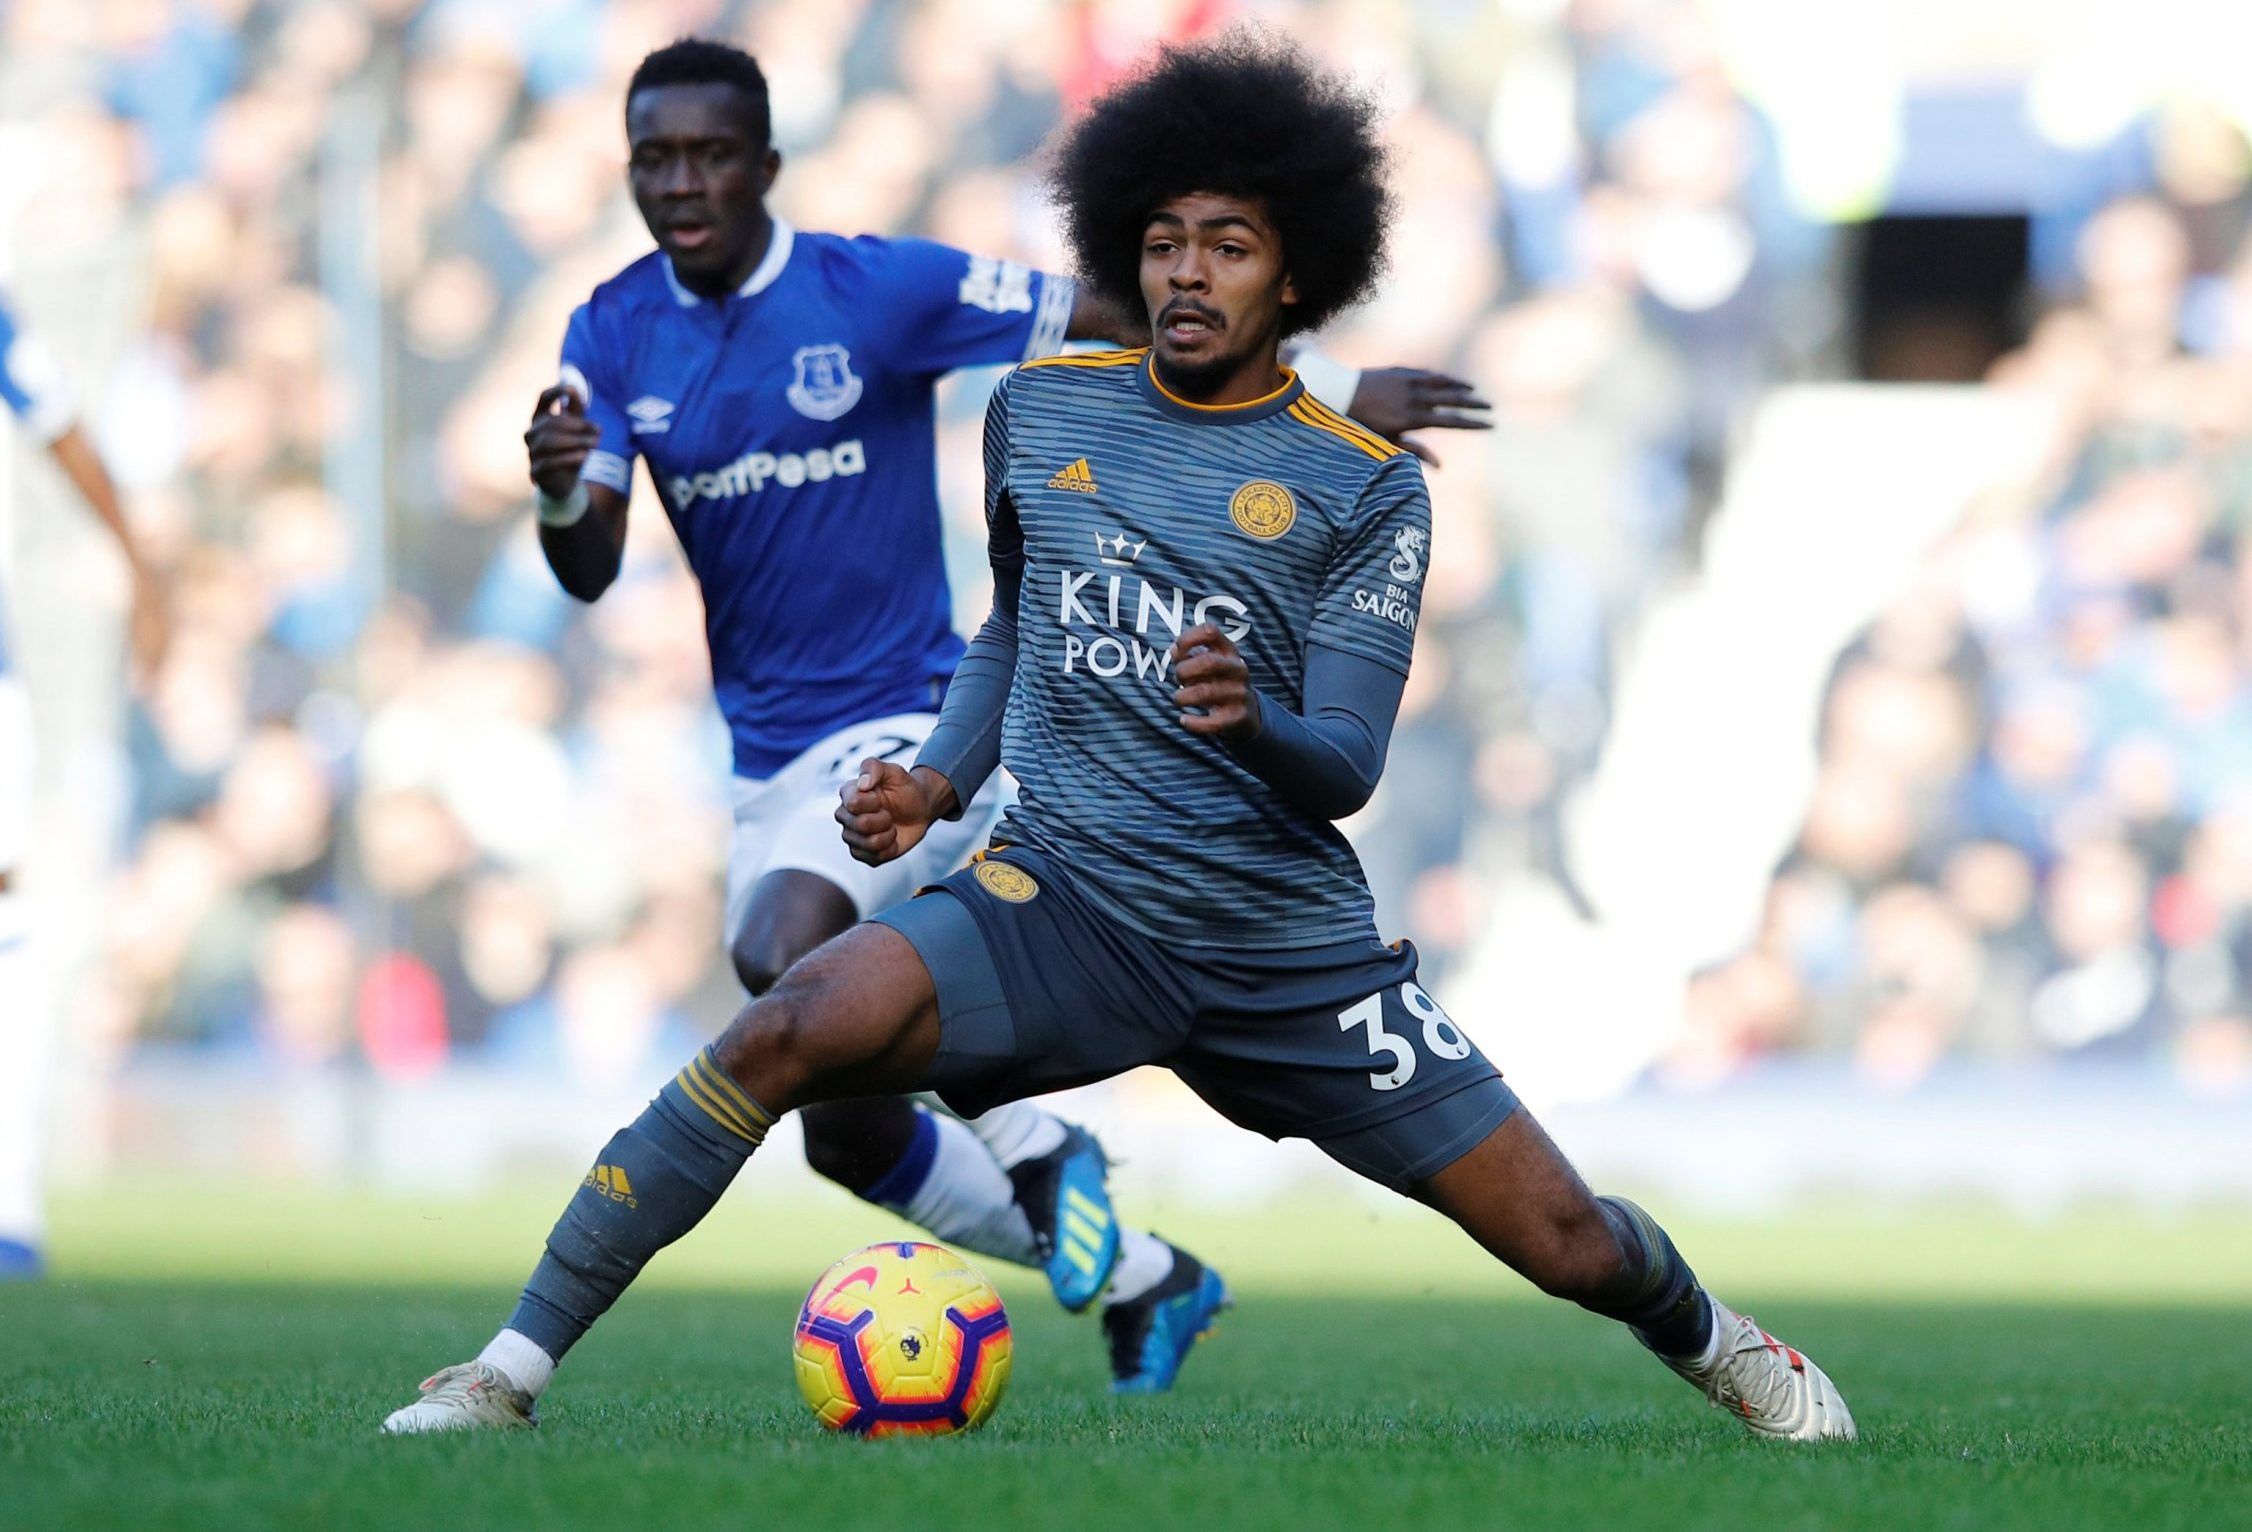 Leicester City's Hamza Choudhury in action at Goodison Park